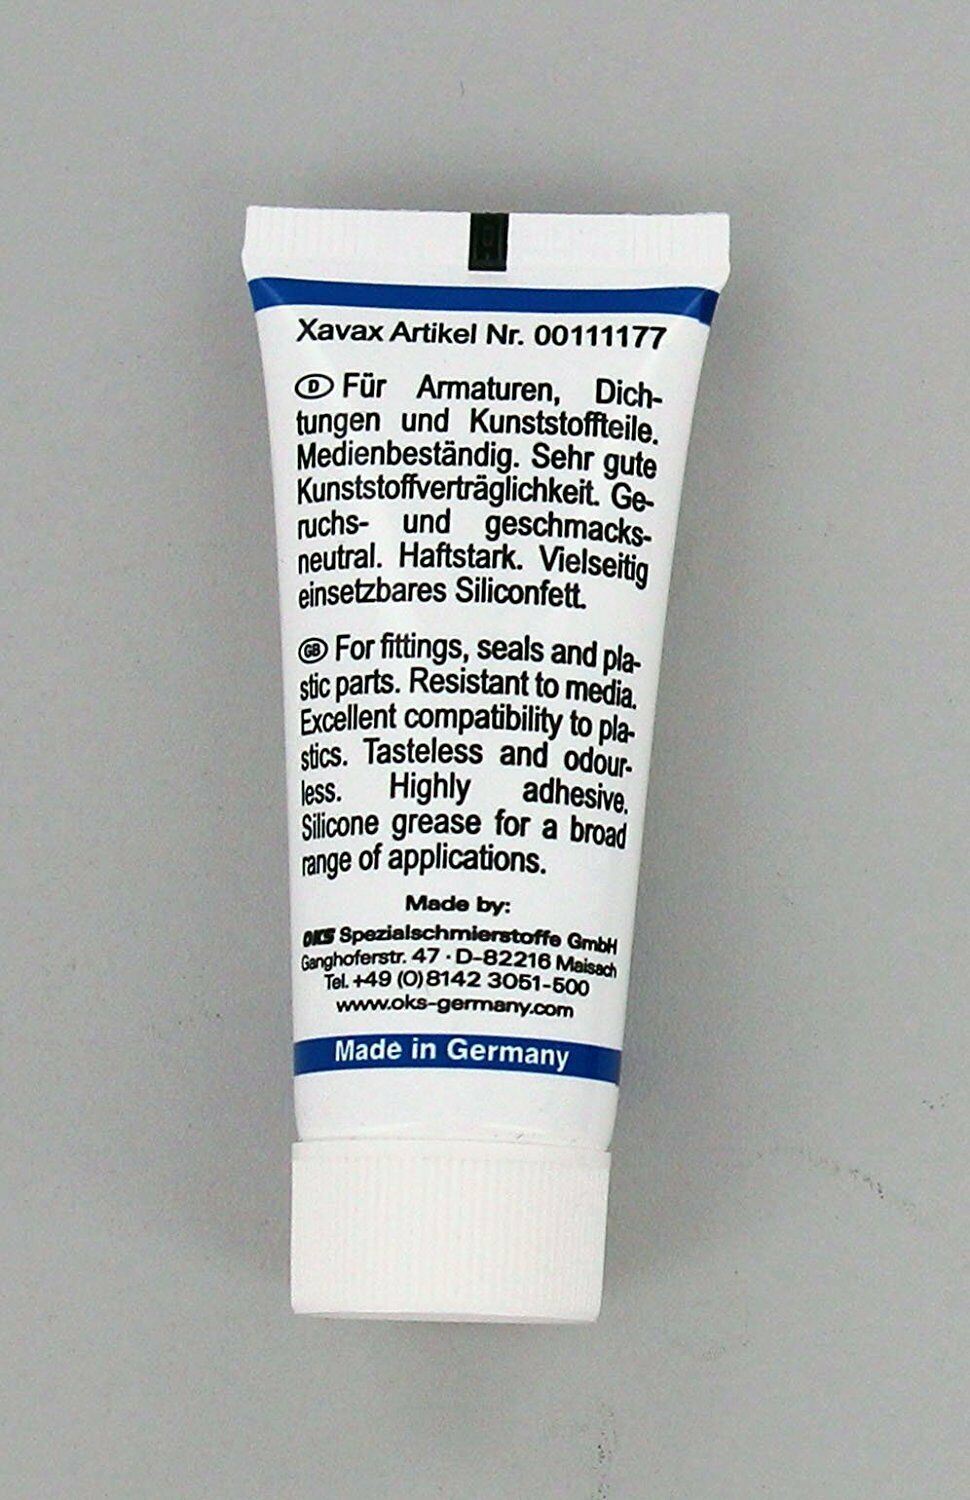 Xavax OKS 1110 Multi Silicone Grease, 20g, Food Safe, For Automatic Coffee Machine Lubrication